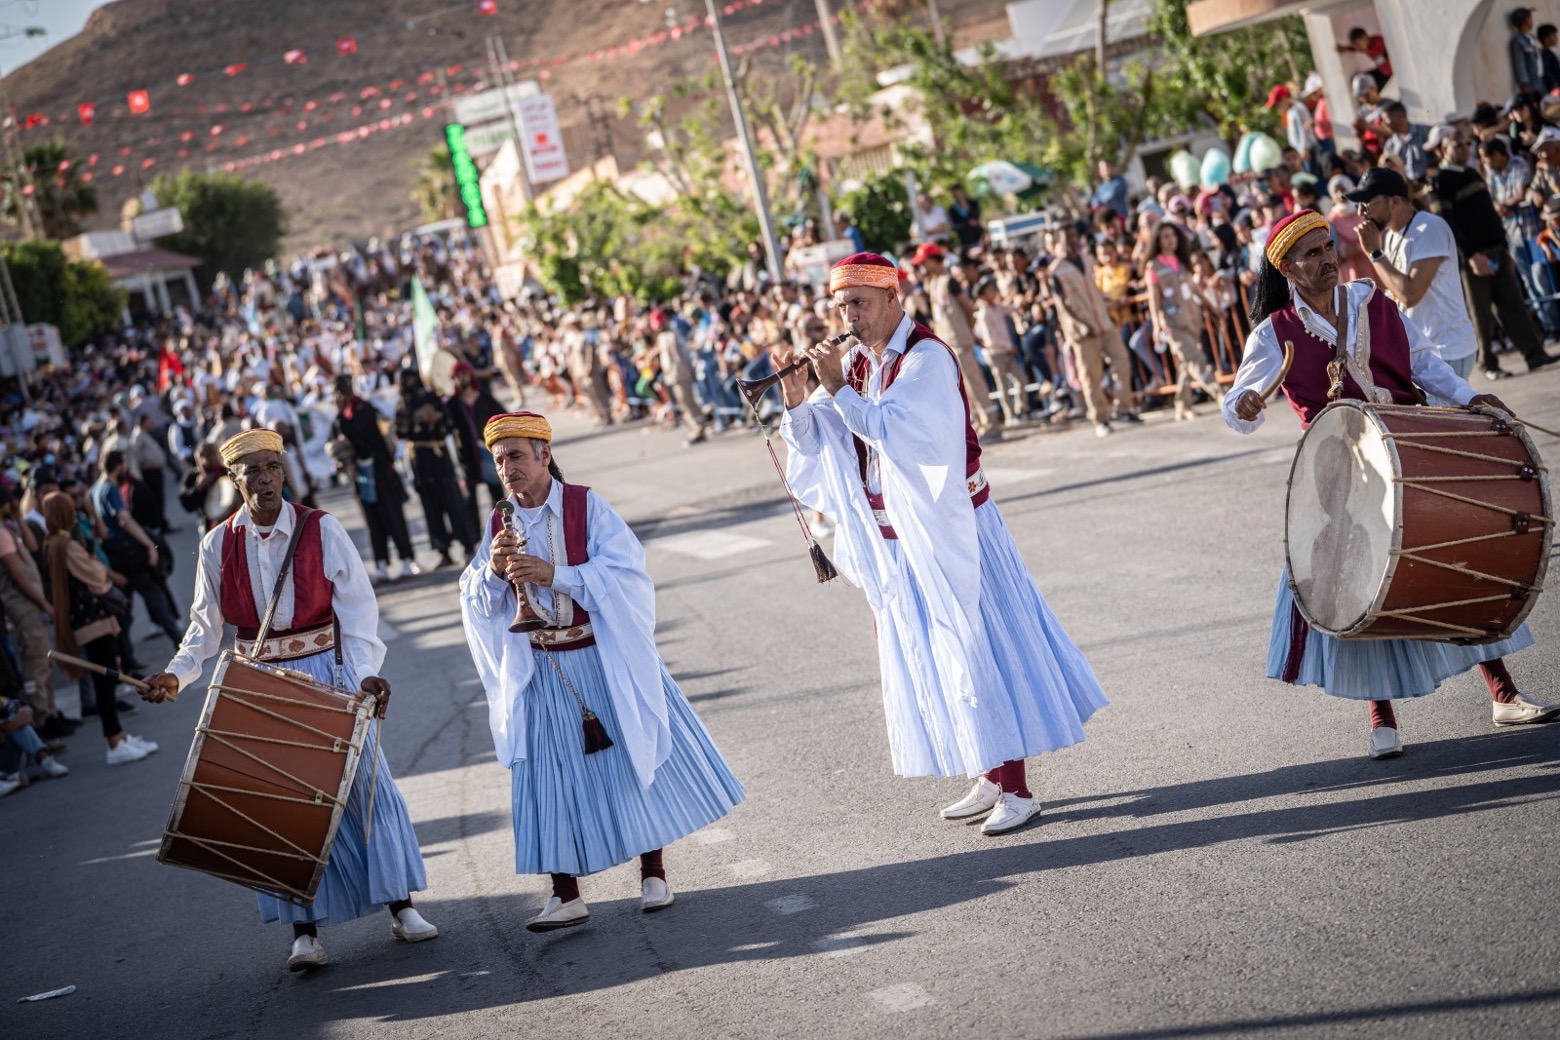 The International Festival of Matmata: Creating Connections Between Local Businesses and Thousands of Visitors